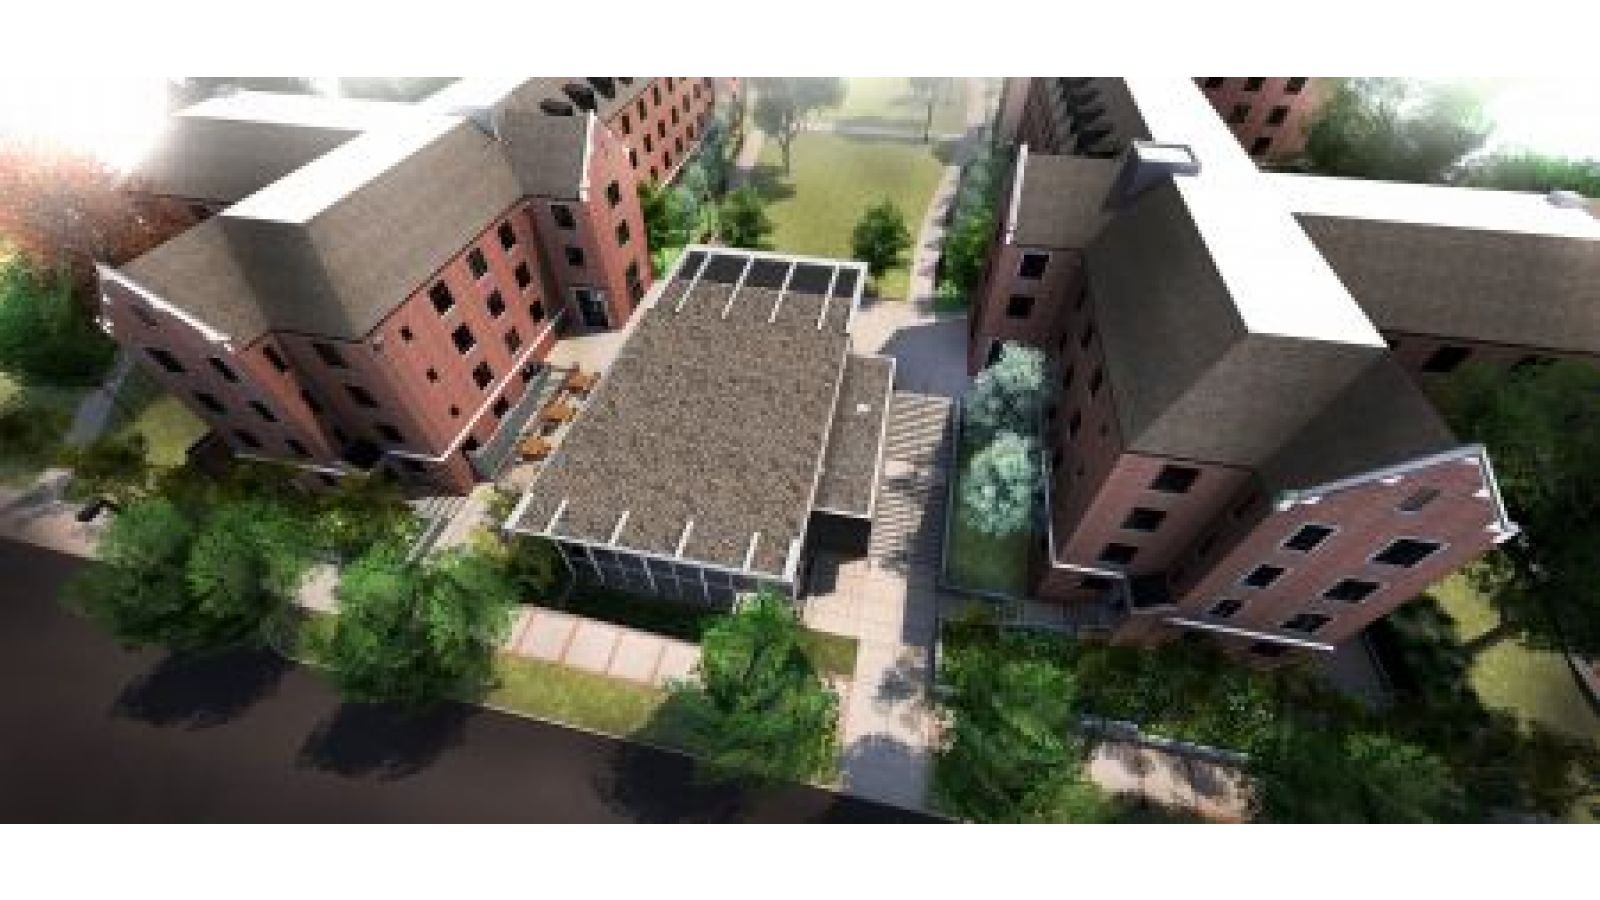 Georgia Institute of Technology Renovates Glenn and Towers Residence Halls